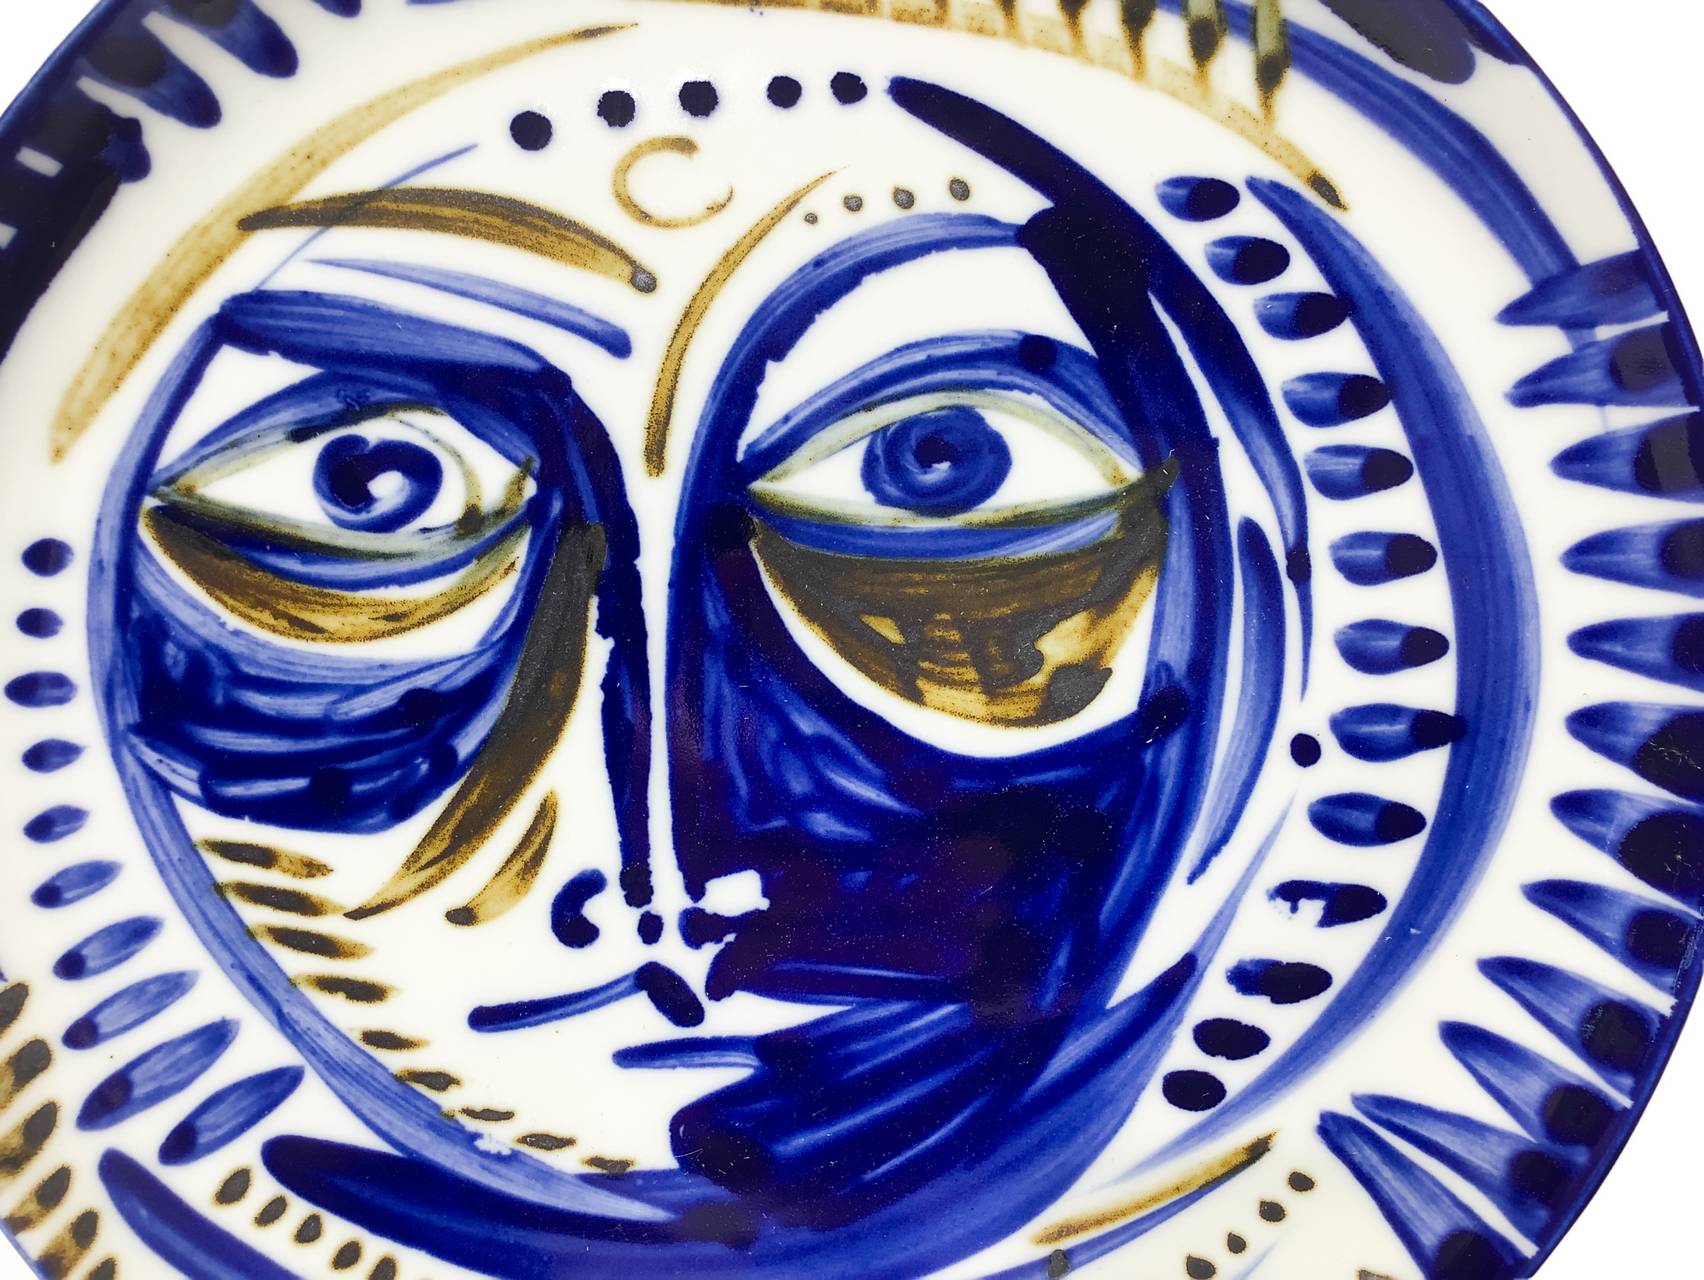 Wall Plate porcelain depicting his face in shades of blue, in the style of Vallaurice ceramics. Diam - Image 2 of 4